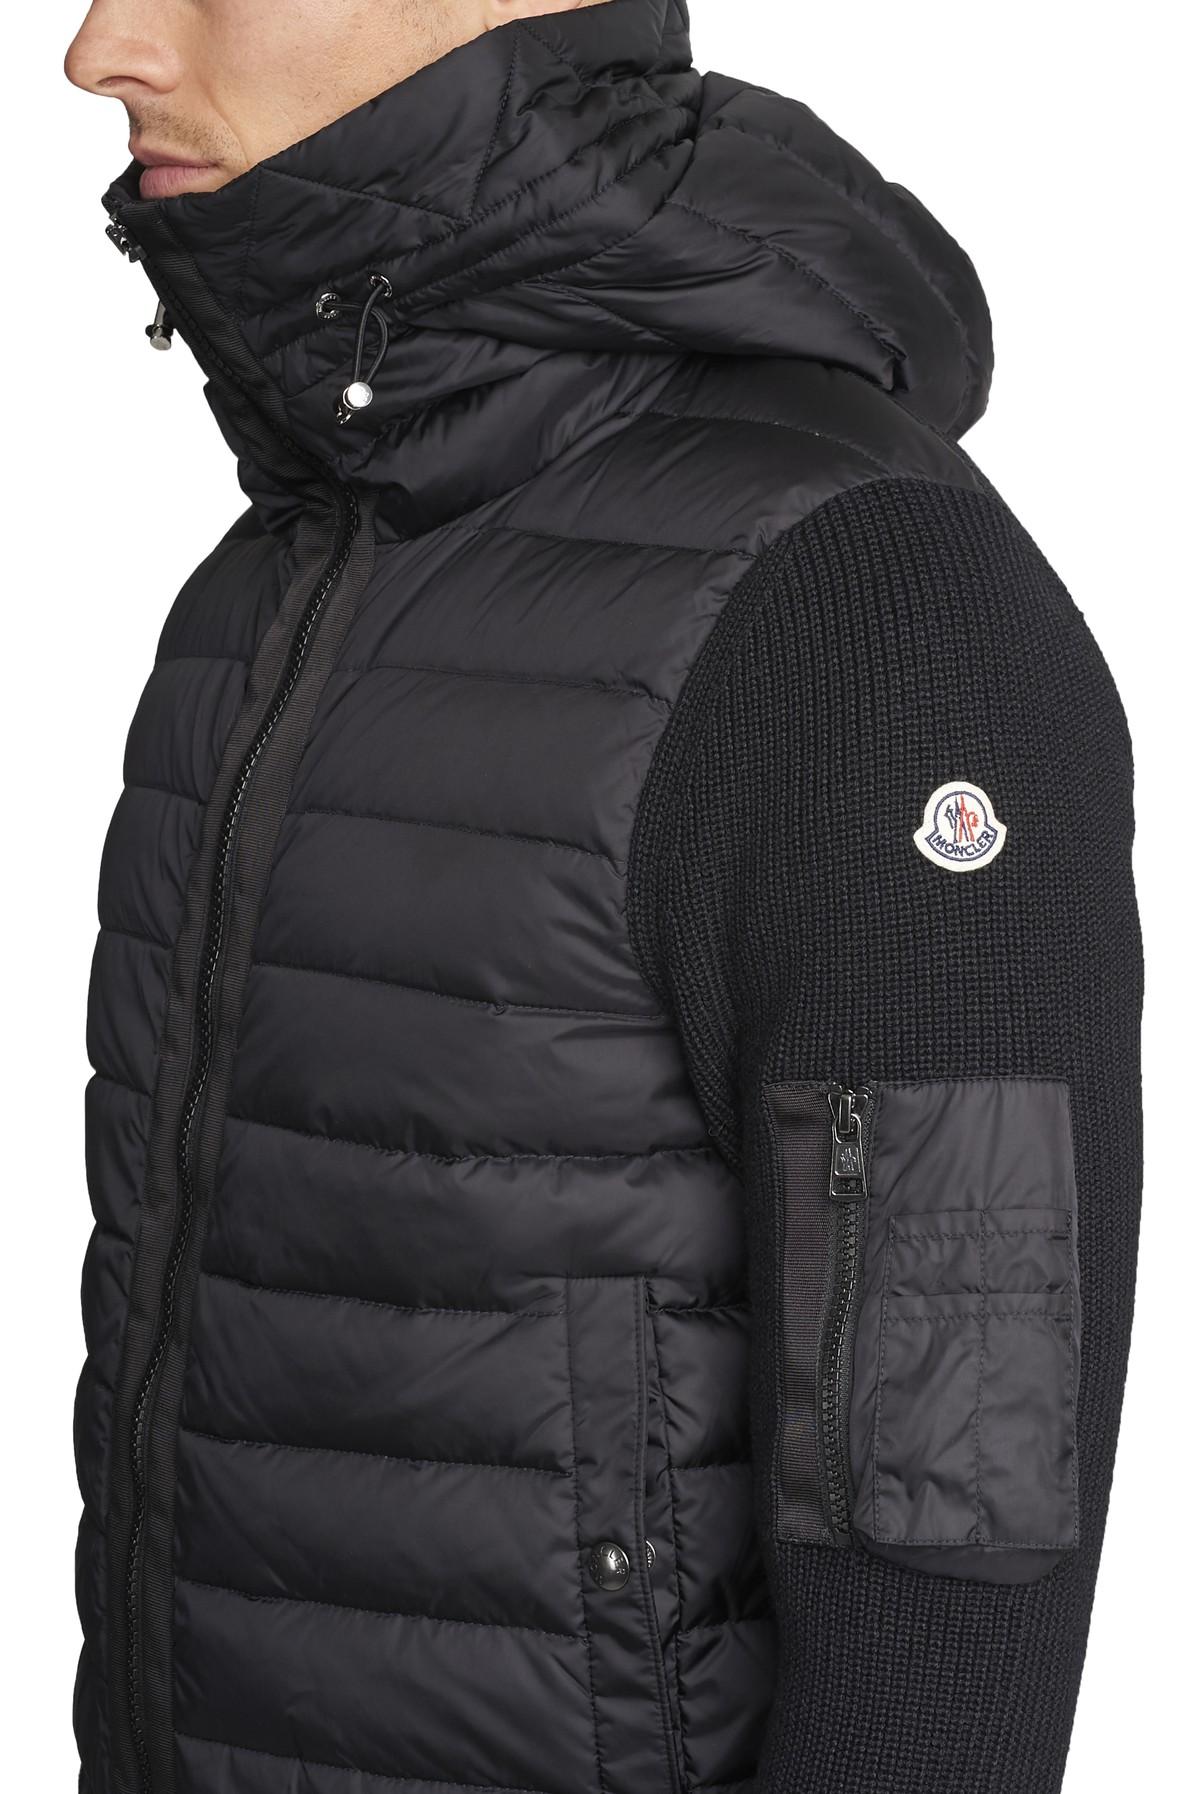 Moncler Double Fabric Jacket in Black for Men - Lyst